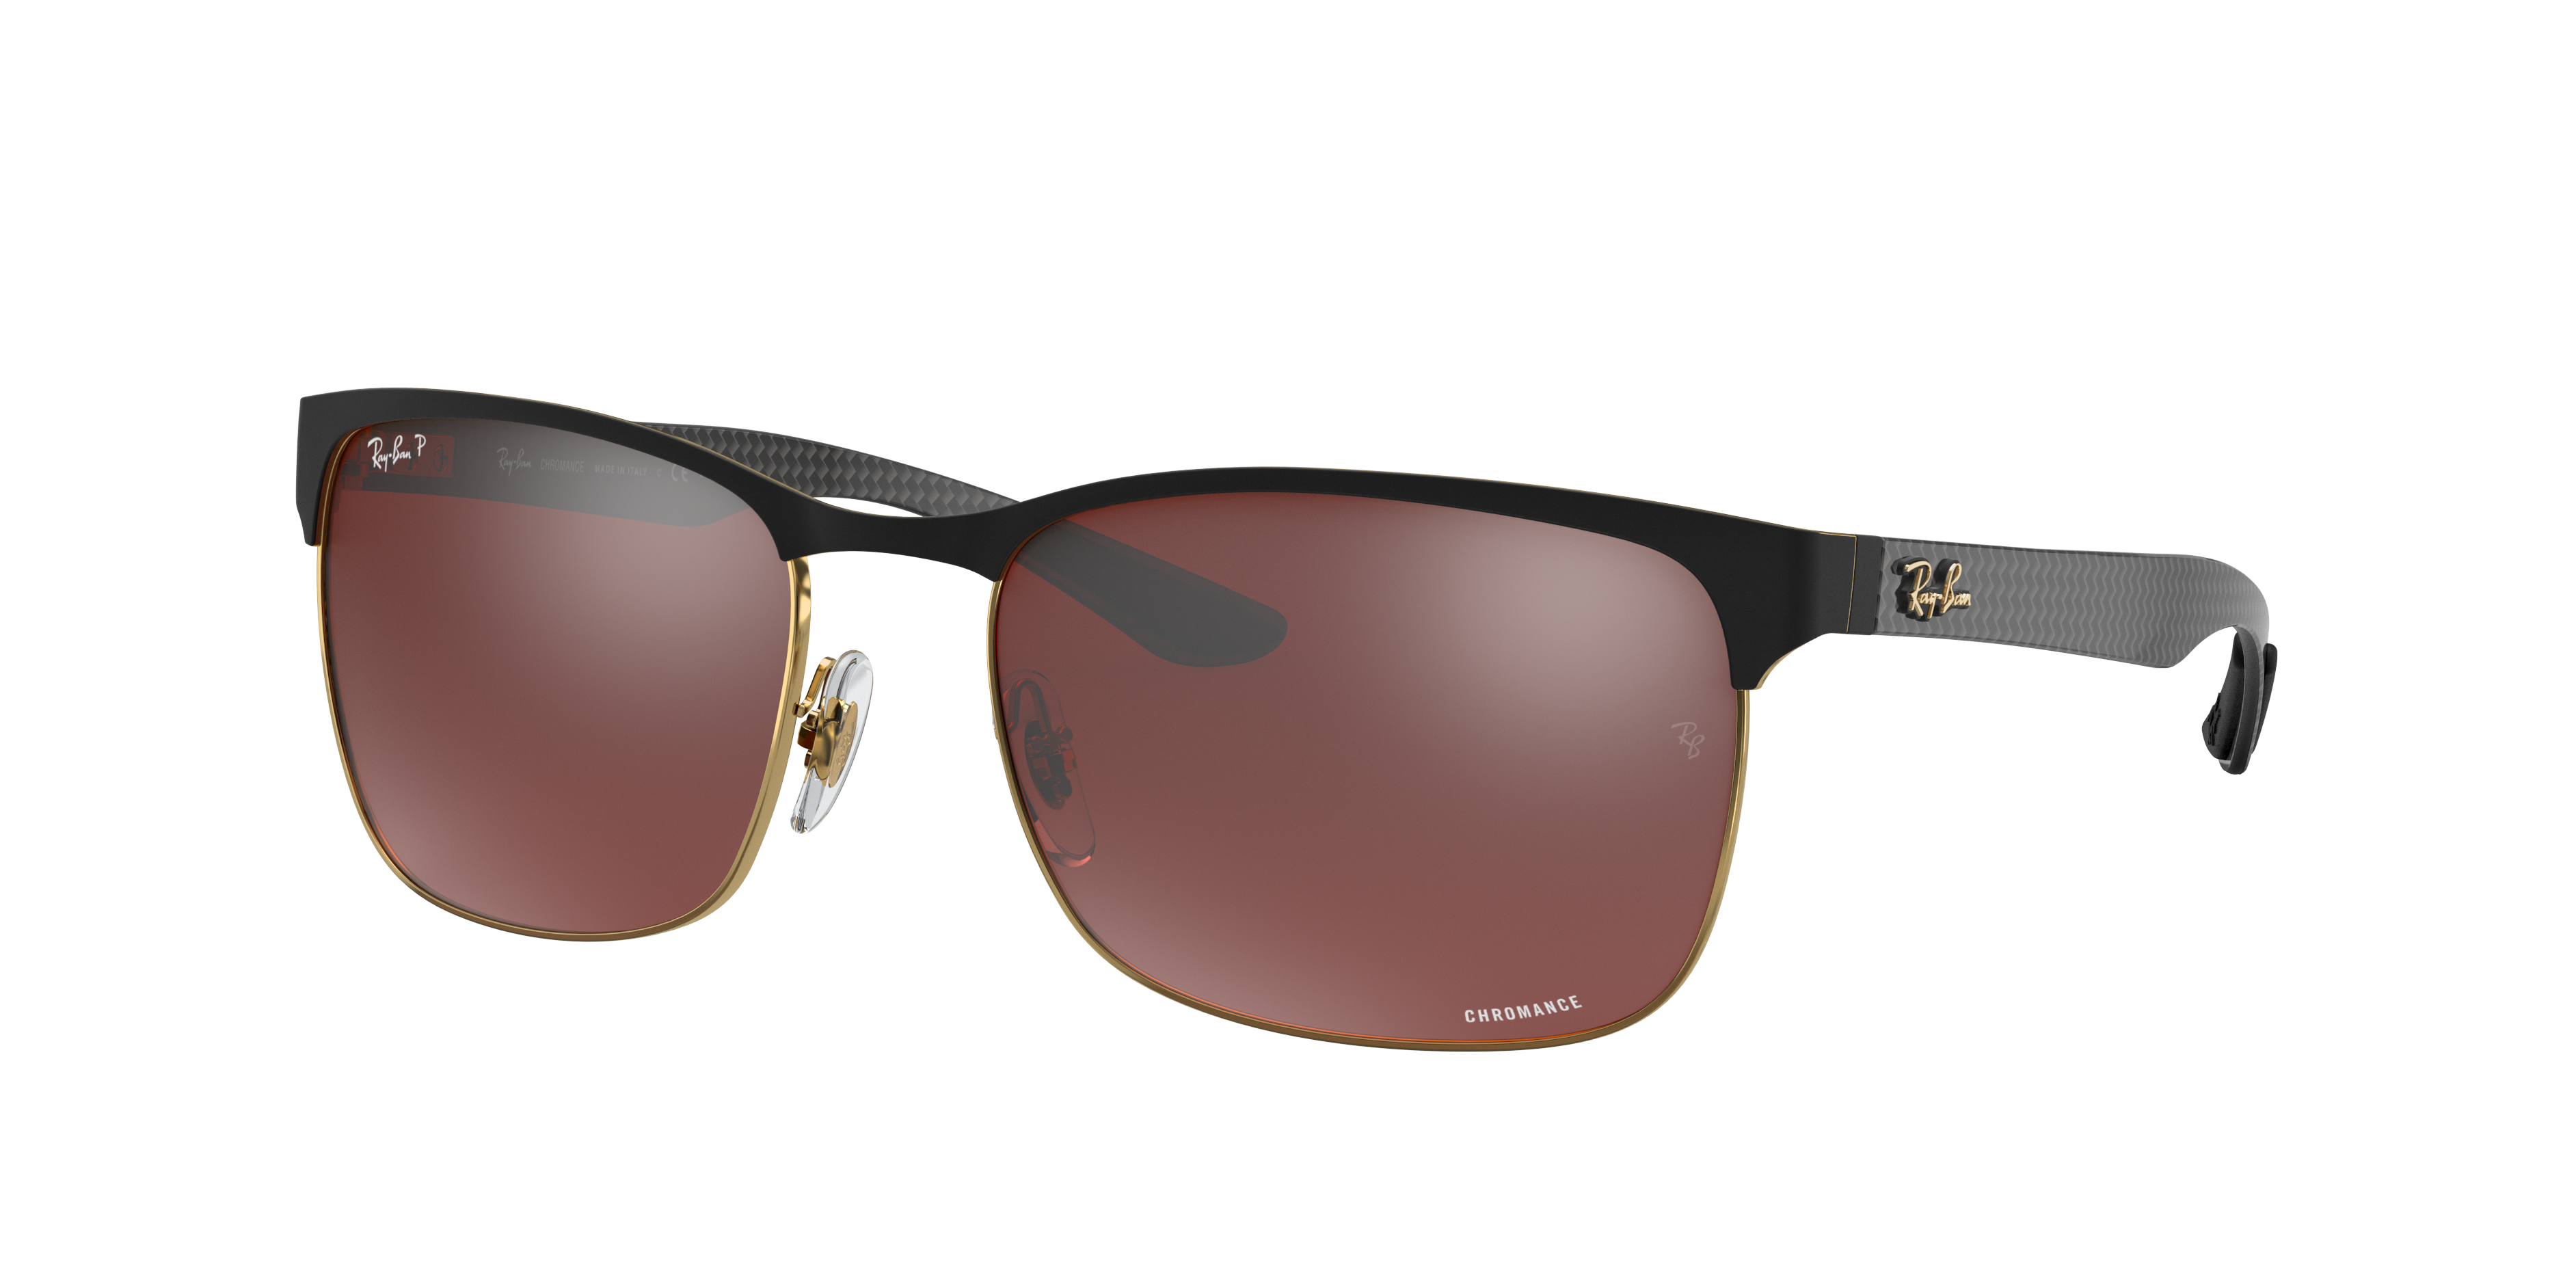 Rb8319ch Chromance Sunglasses in Black On Gold and Pink | Ray-Ban®